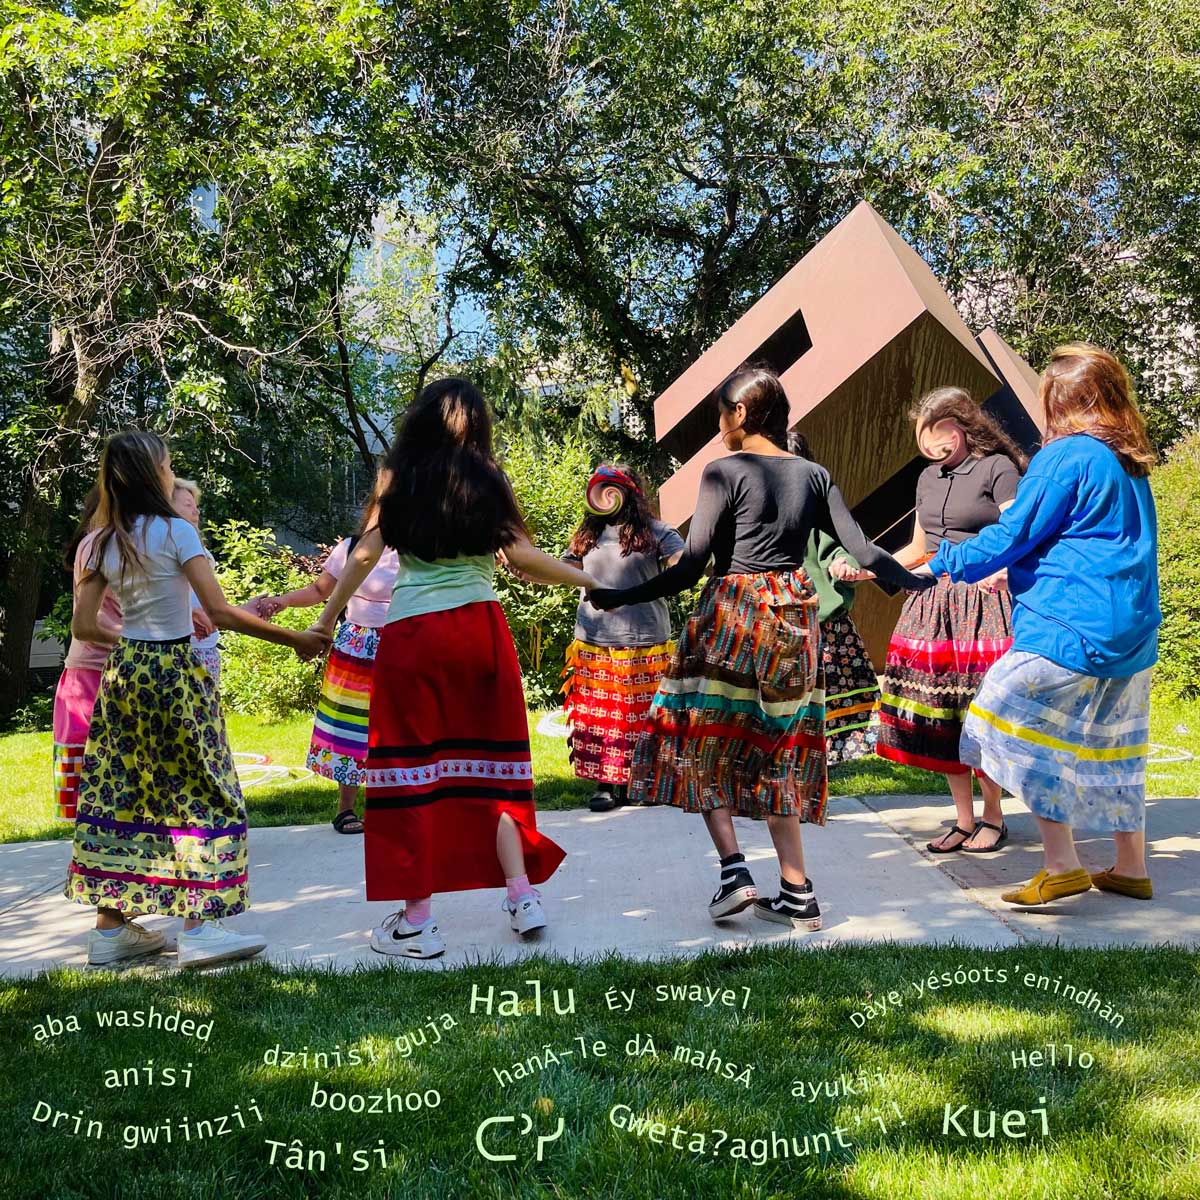 Outdoor round dance by youths in traditional skirts for Indigenous language revitalization, with greeting words overlaid.